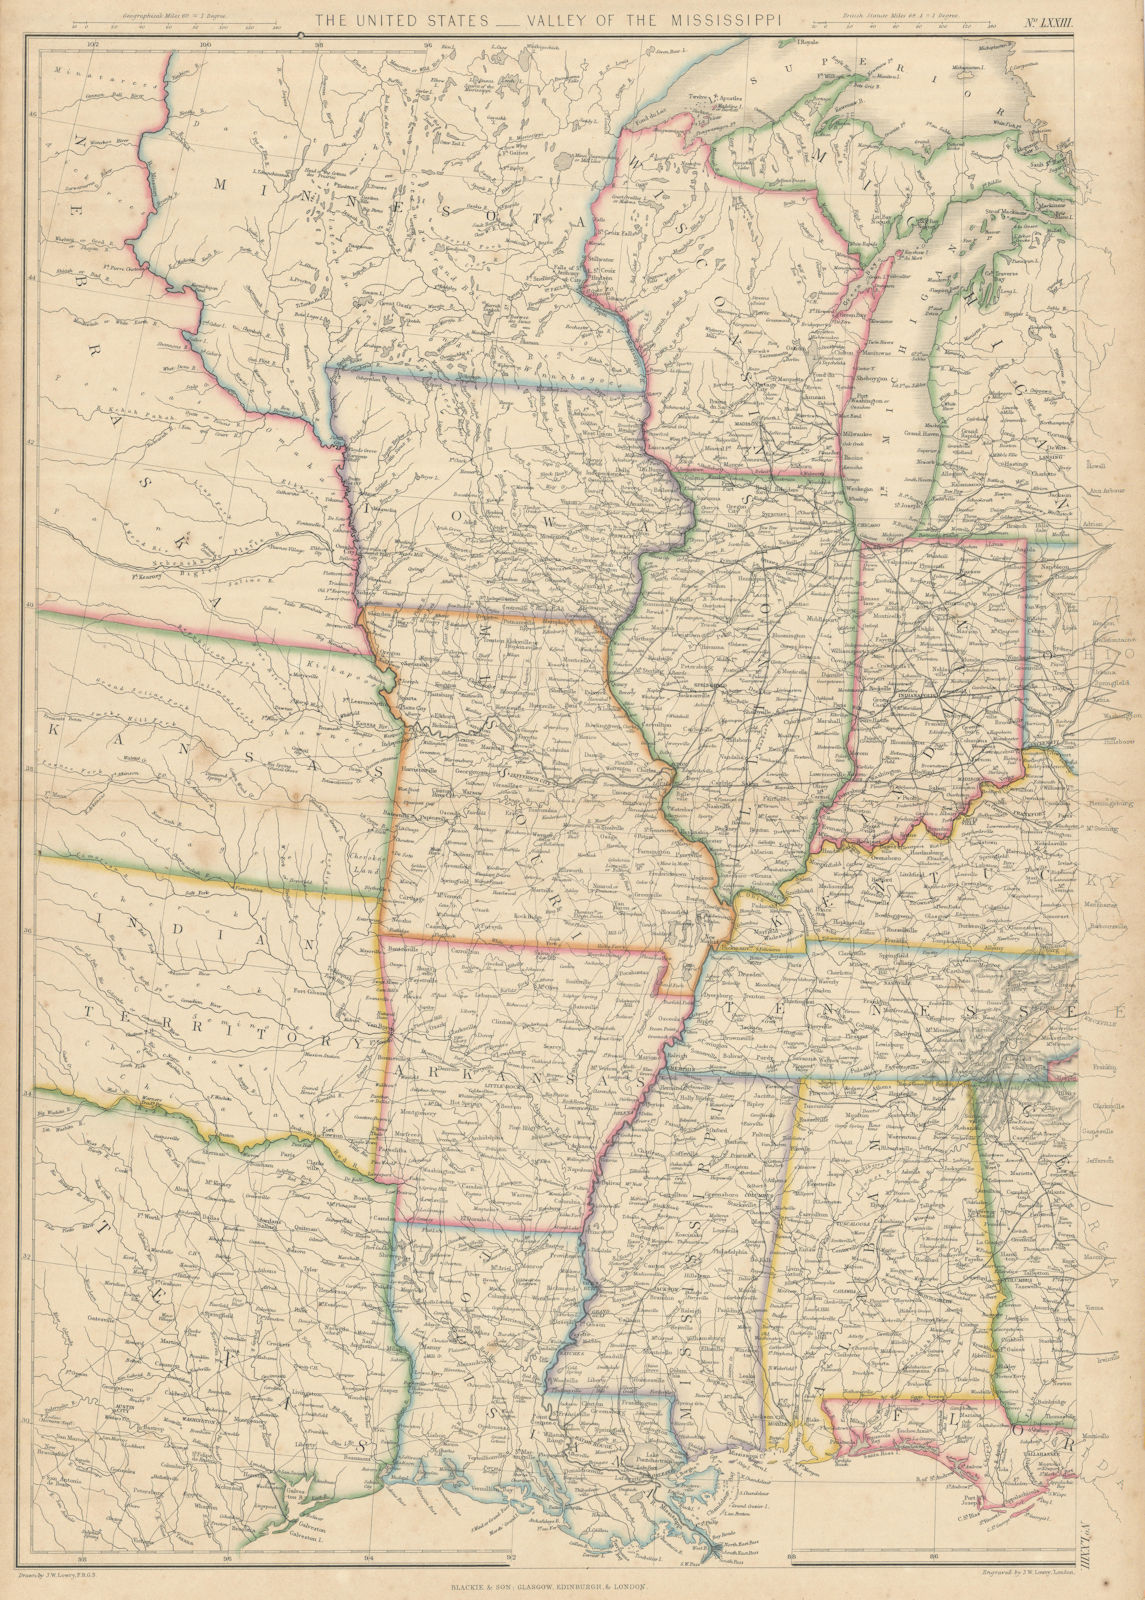 Associate Product United States - Valley of the Mississippi by Joseph Wilson Lowry. USA 1860 map